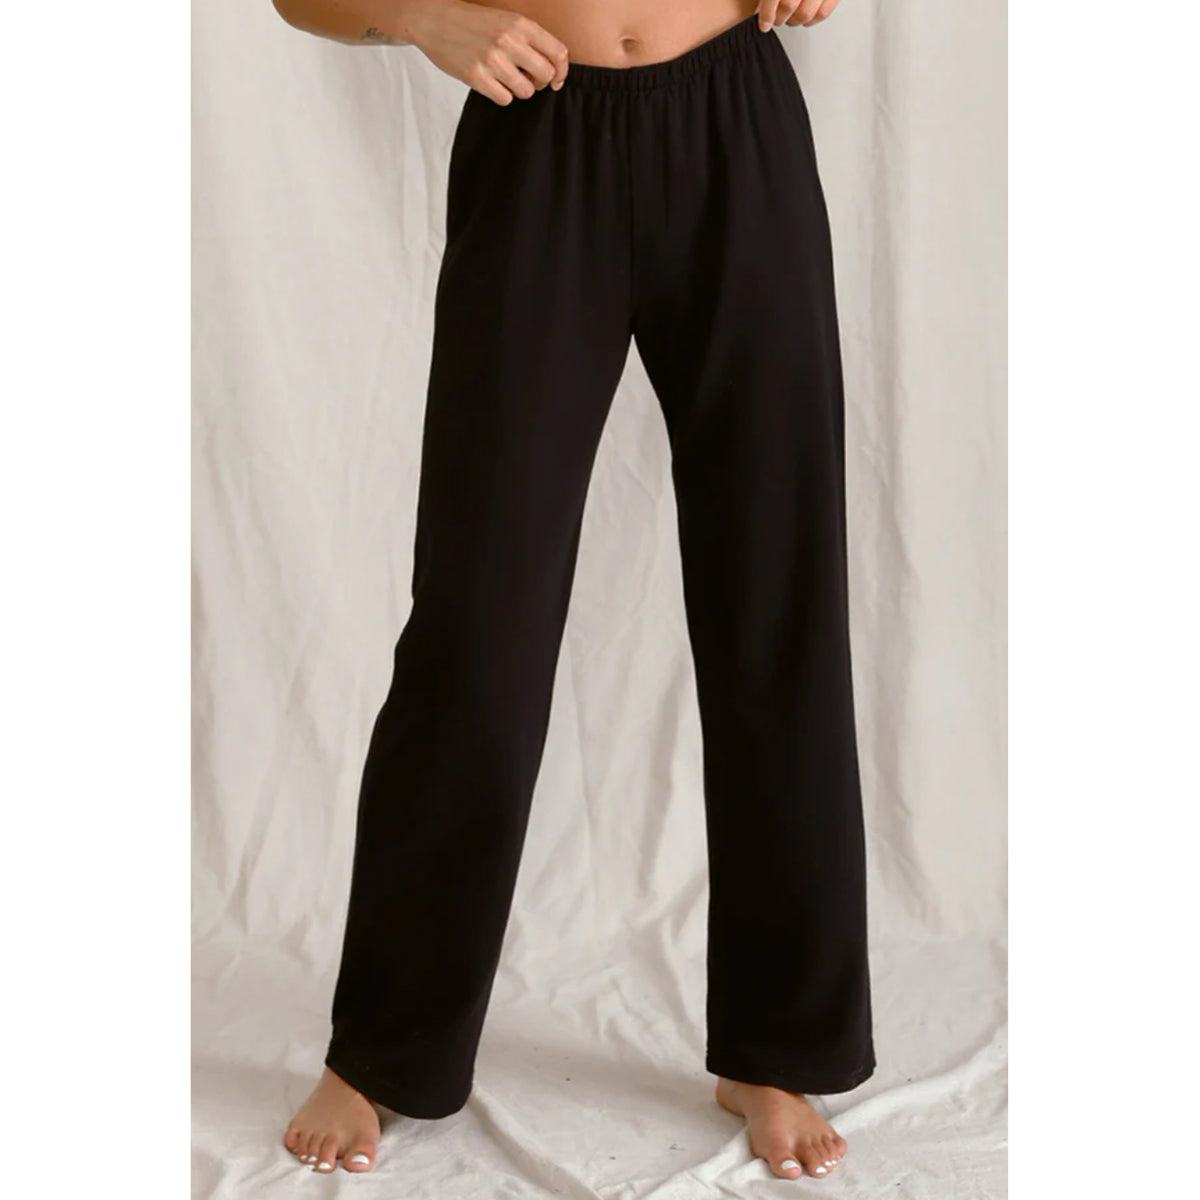 Perfect White Tee Hannah Wide Leg Pant in Black